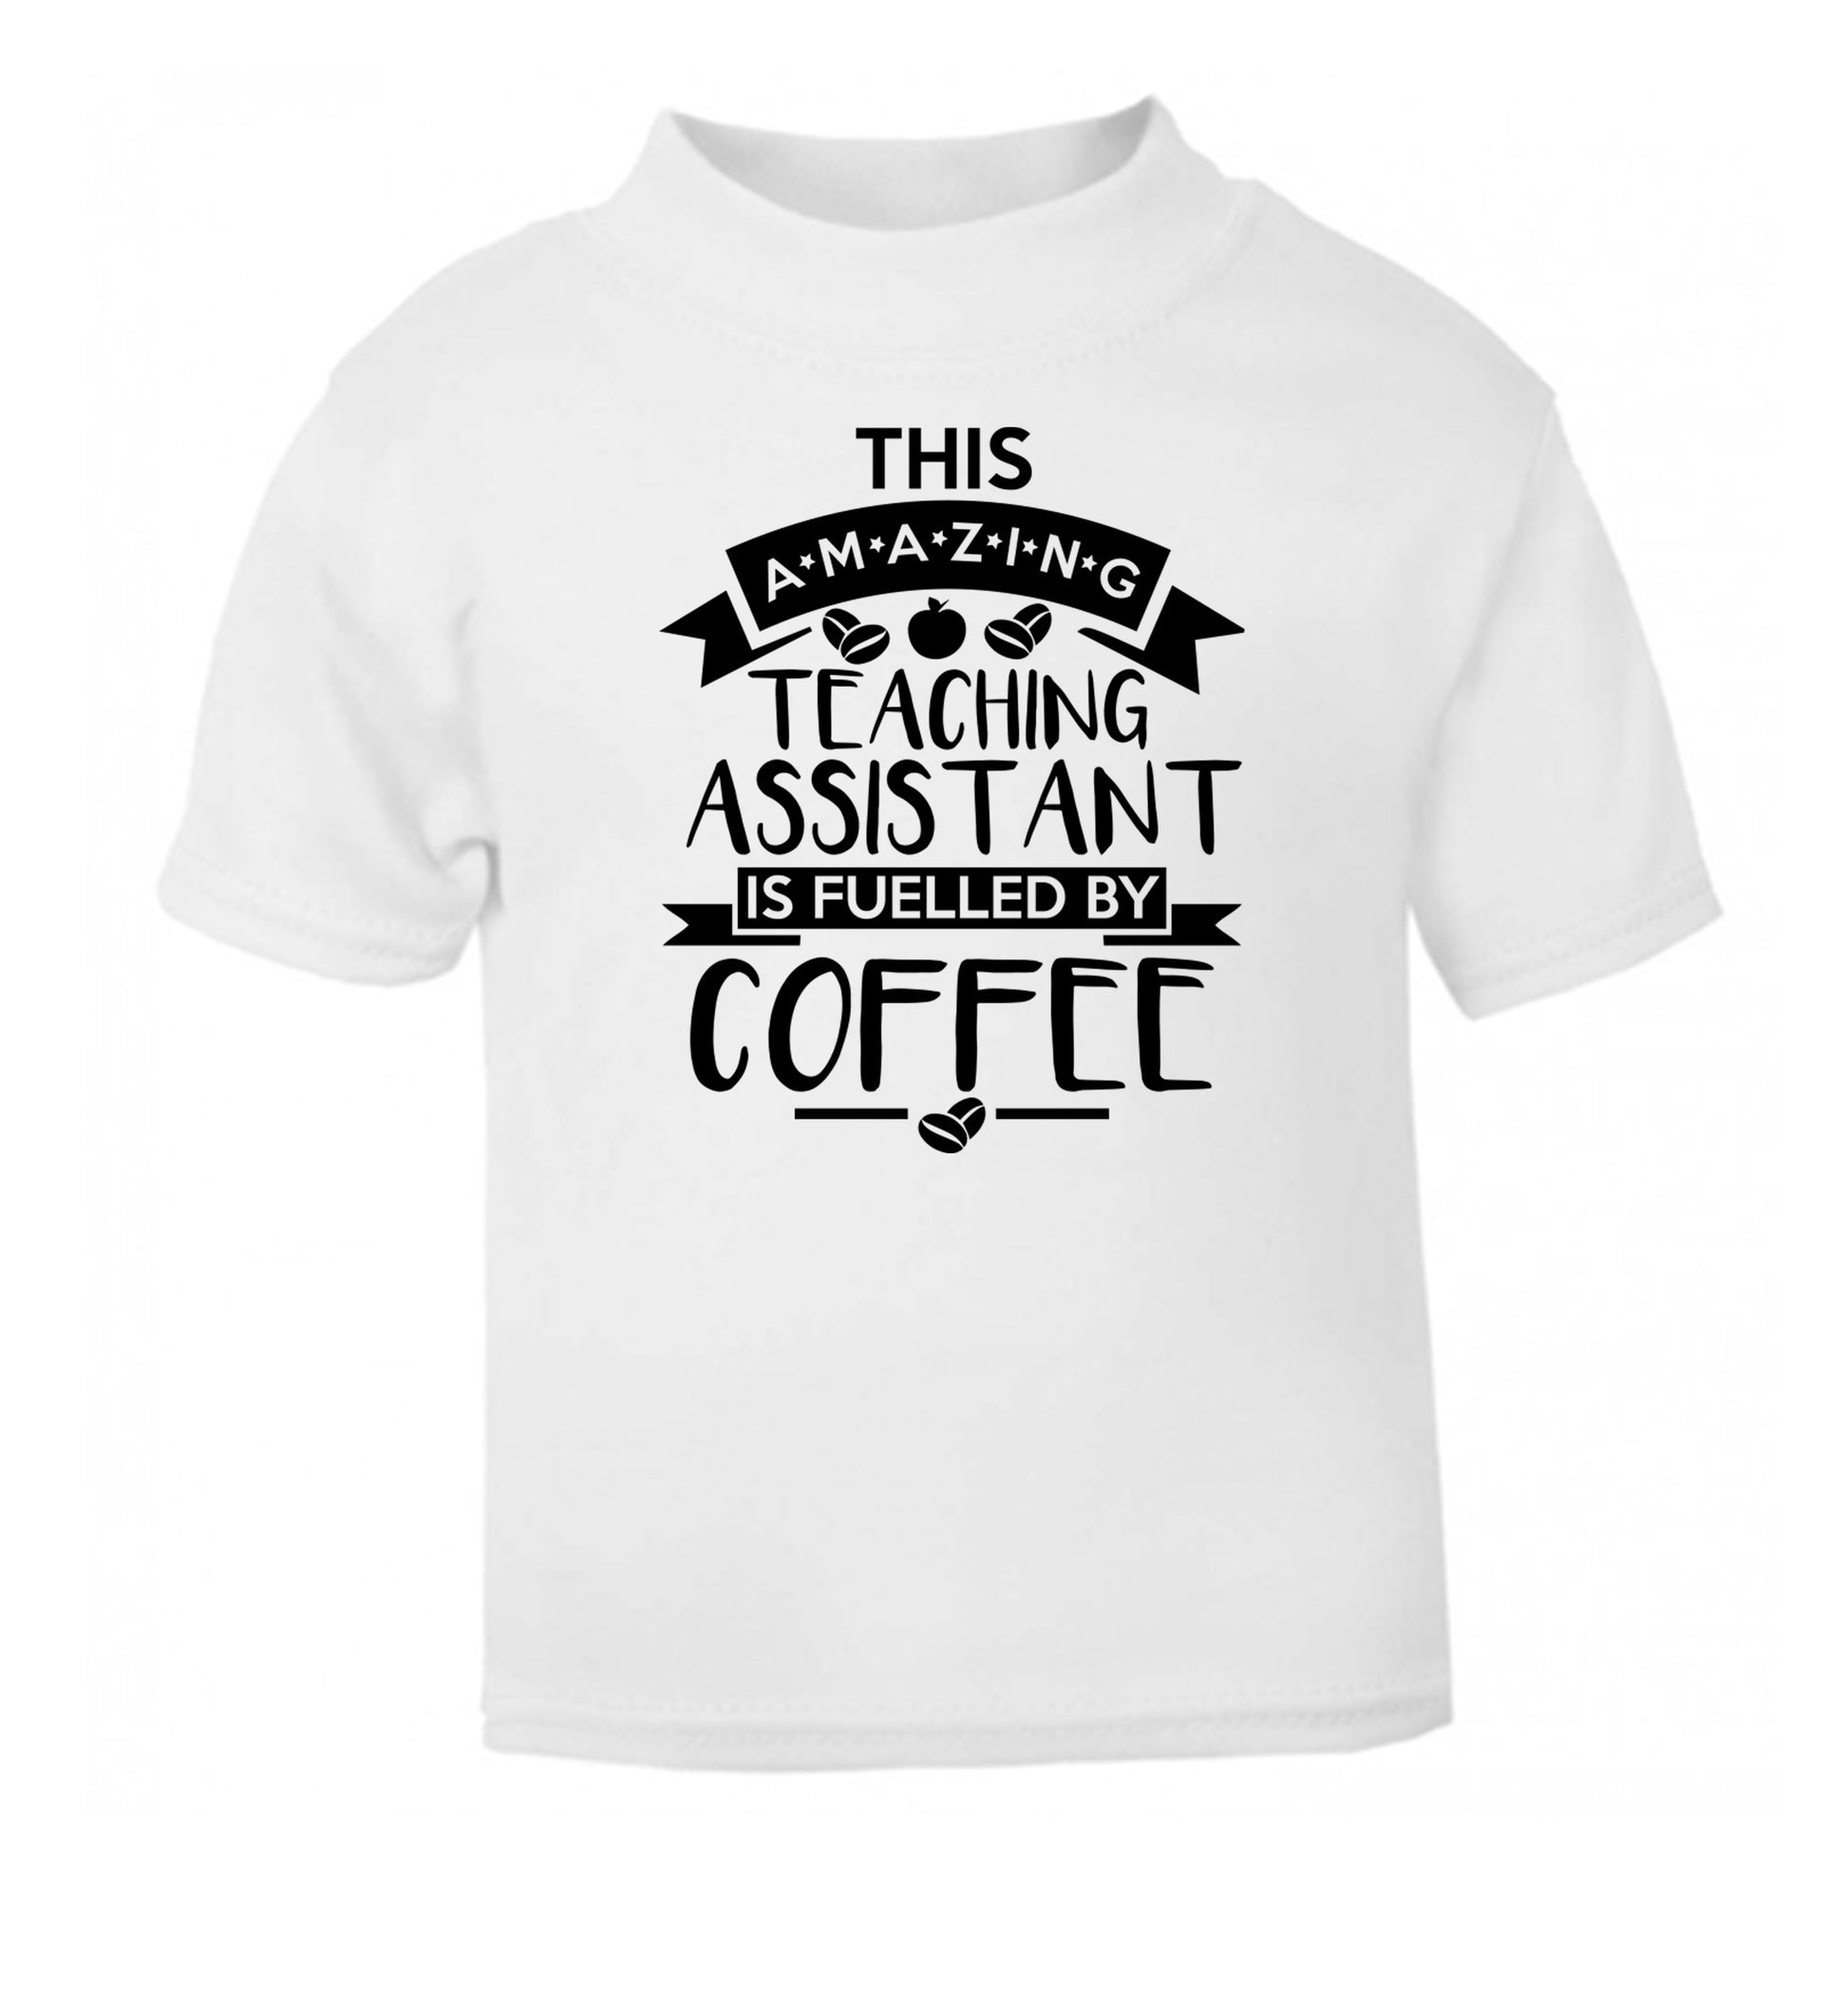 This amazing teaching assistant is fuelled by coffee white Baby Toddler Tshirt 2 Years